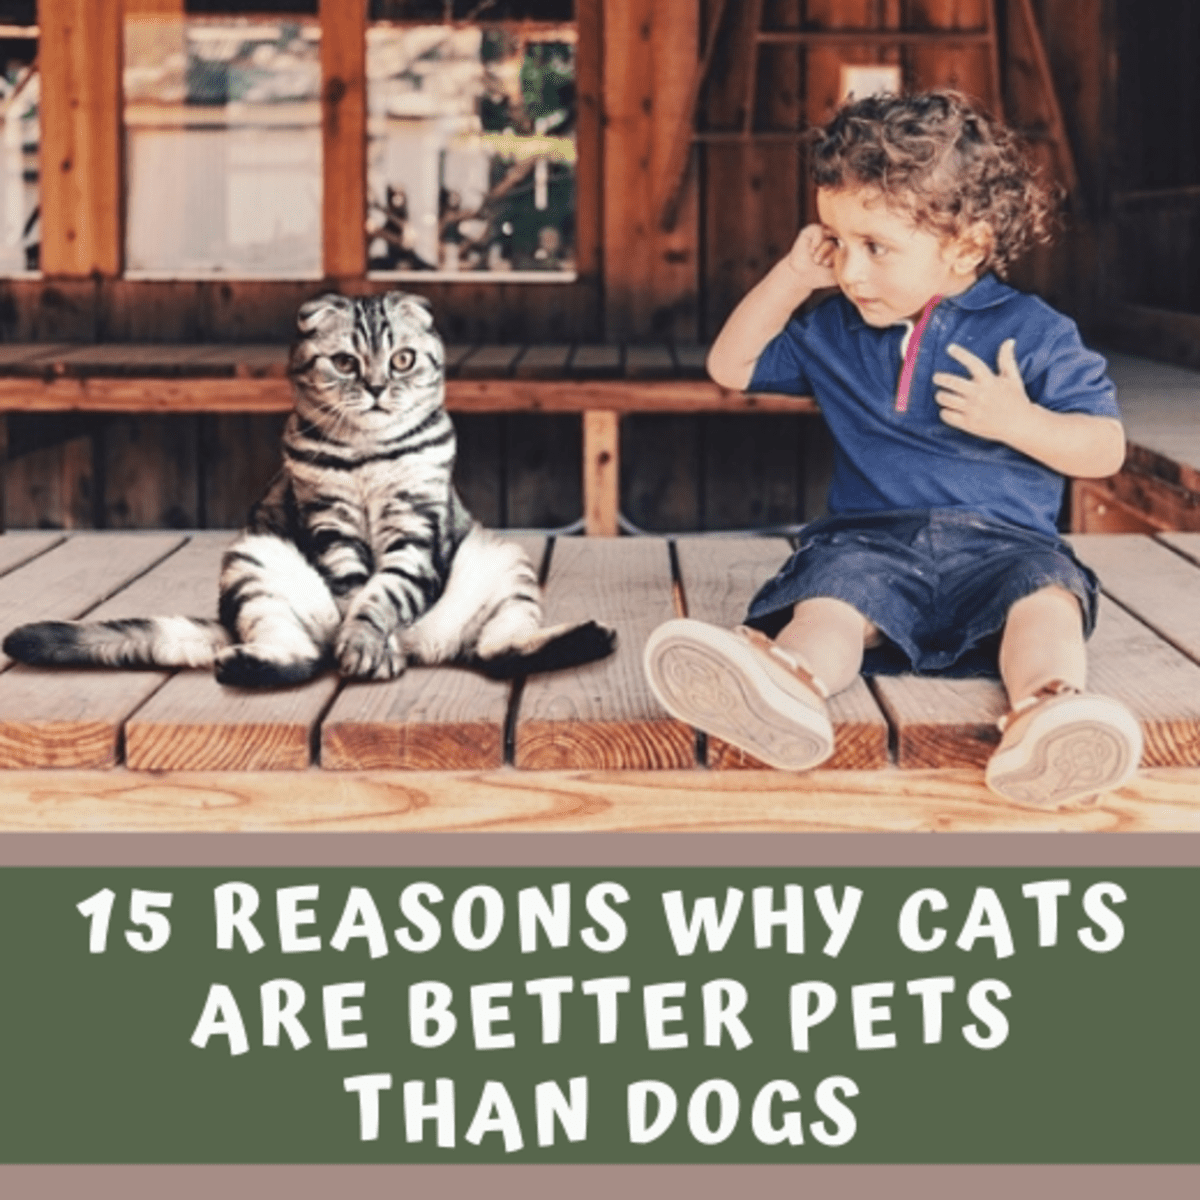 10 Reasons why Pets are good for Kids.